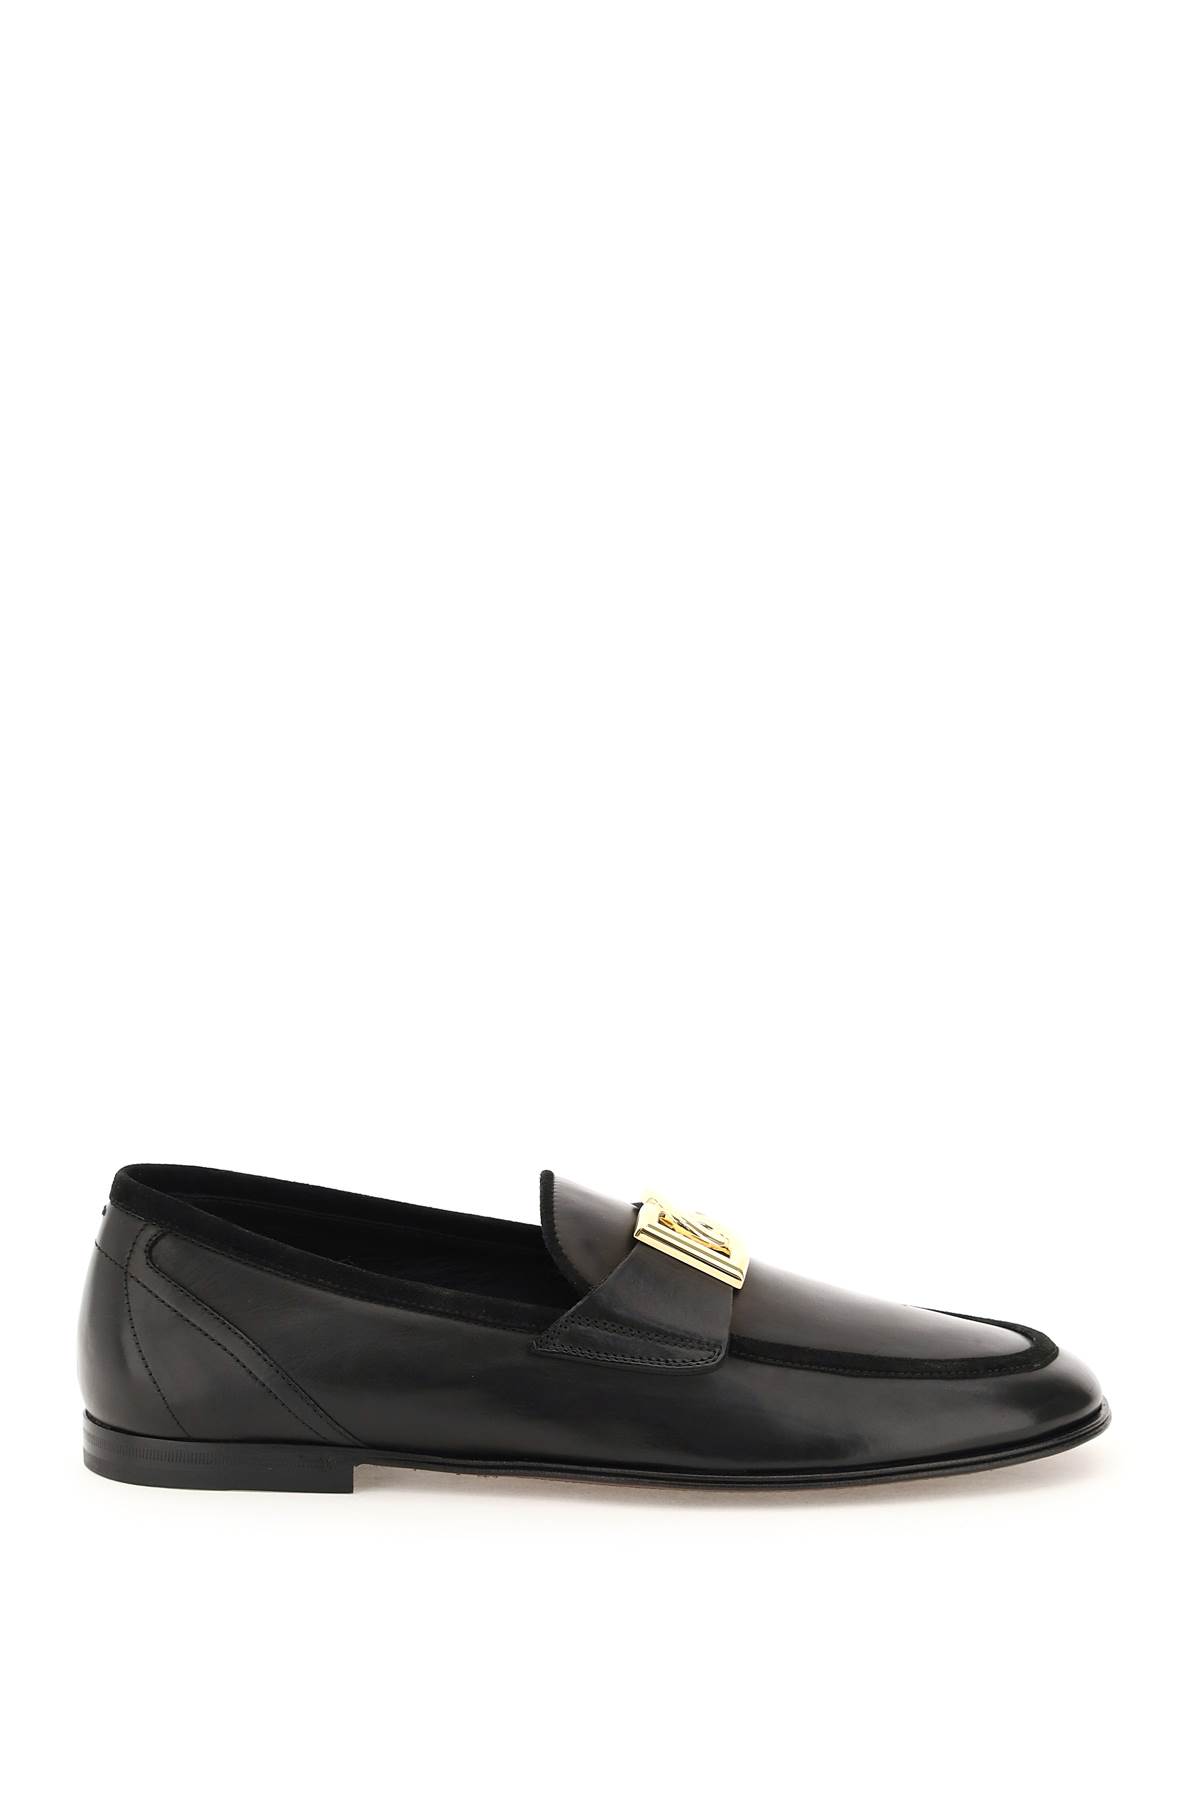 Dolce & Gabbana Leather Ariosto Slippers Loafers